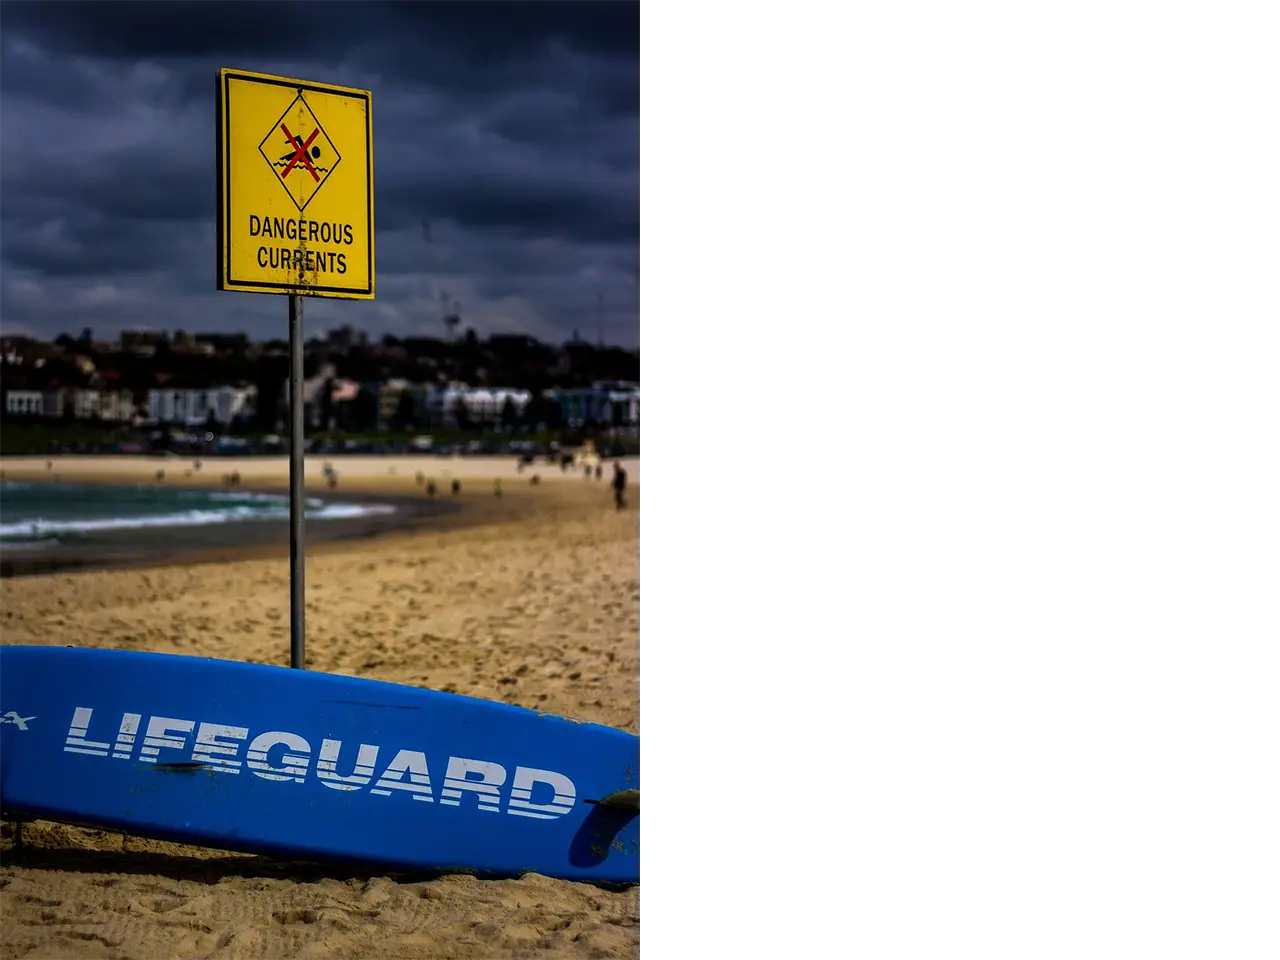 A word of caution: When swimming at Bondi, be cautious to stay between the red and yellow flags.